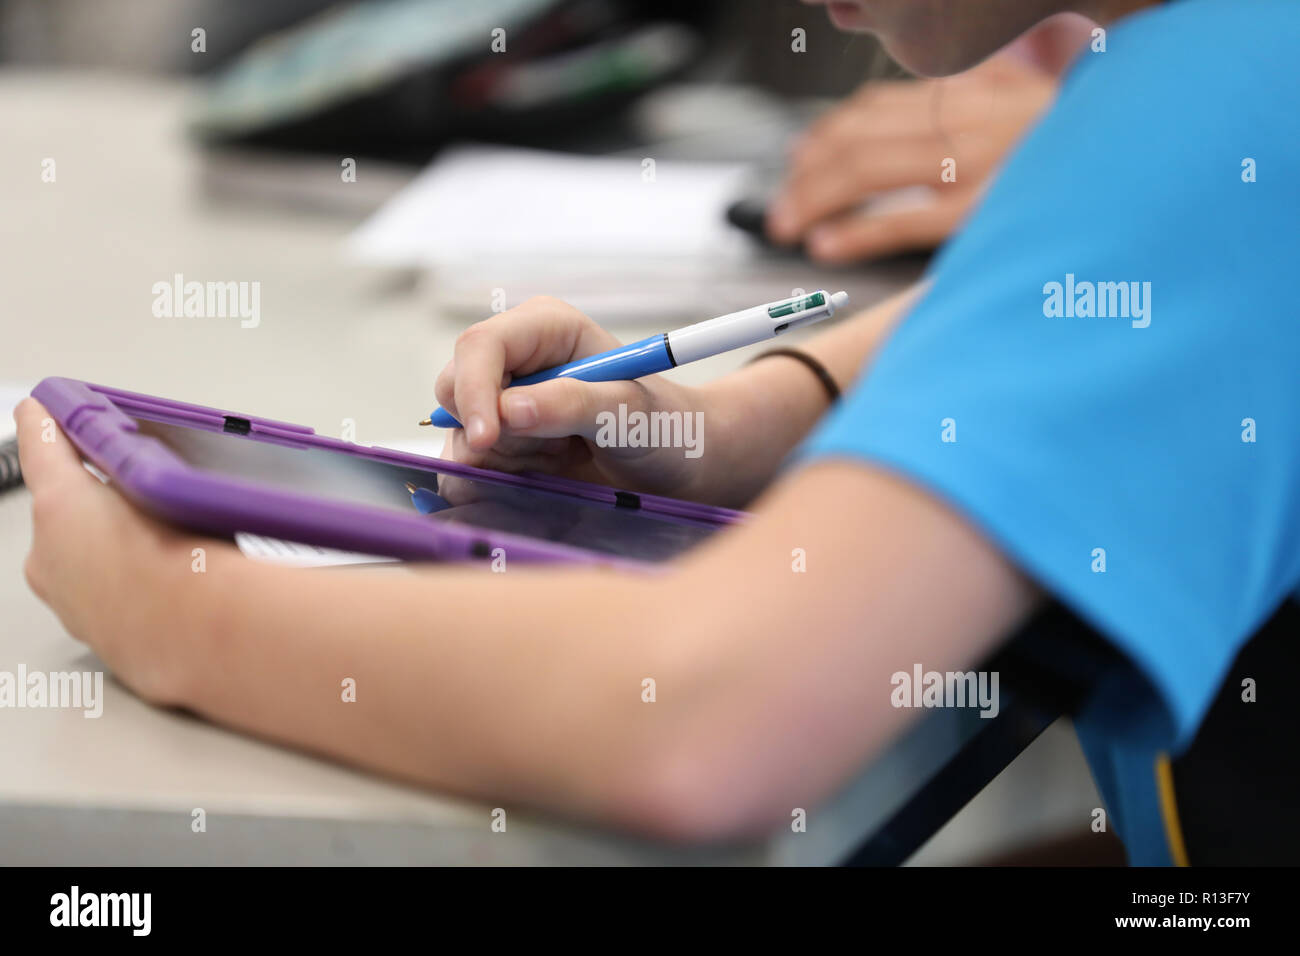 Student using a purple tablet digital information technology tool devise to reseach during class time lesson at a modern high school education educati Stock Photo